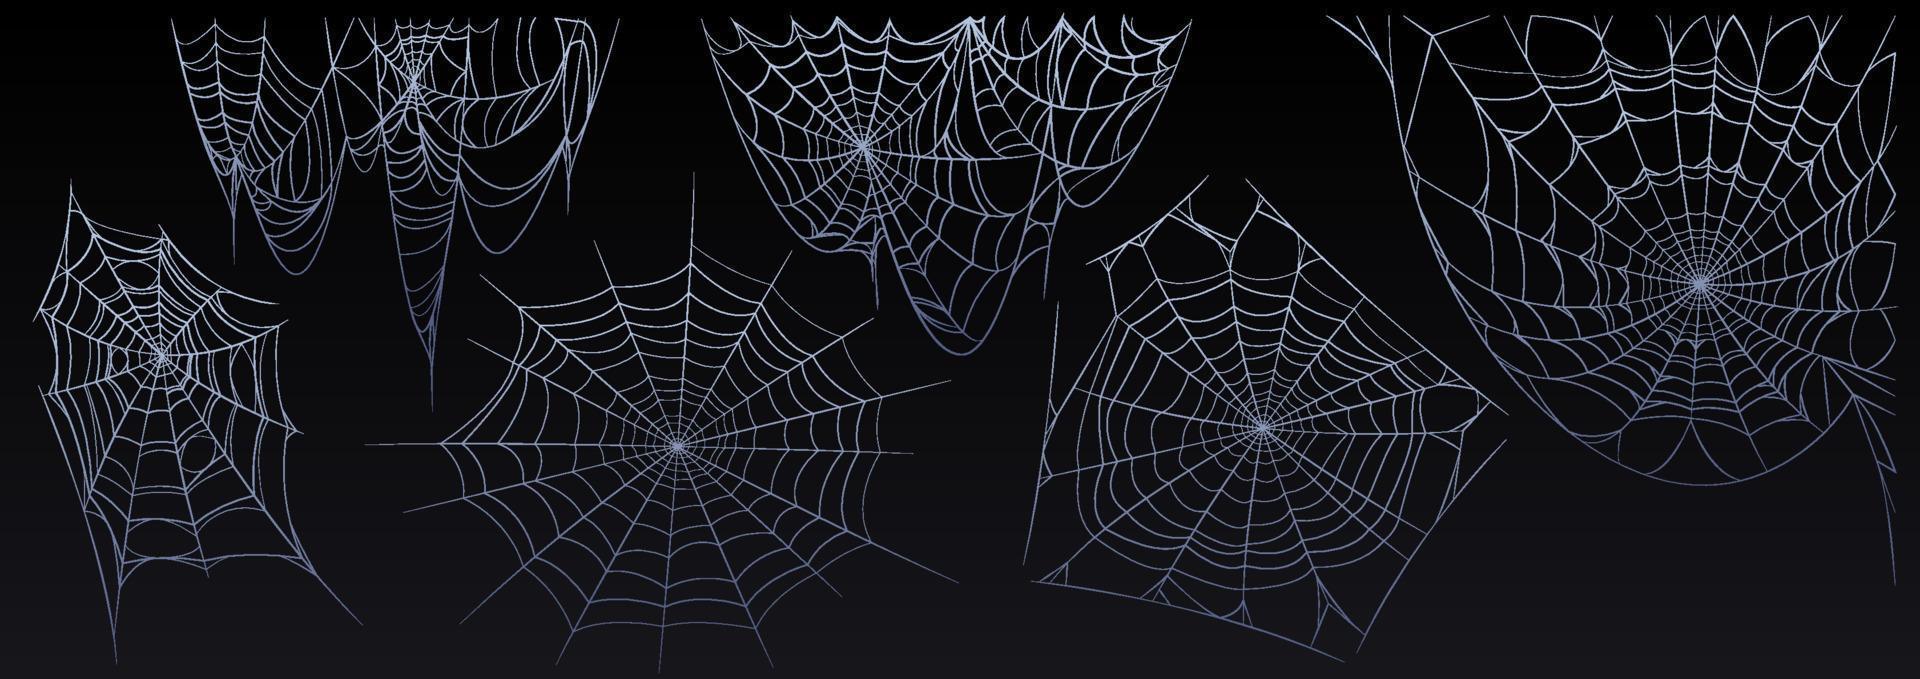 Set of tangled spiderweb hanging isolated on black vector